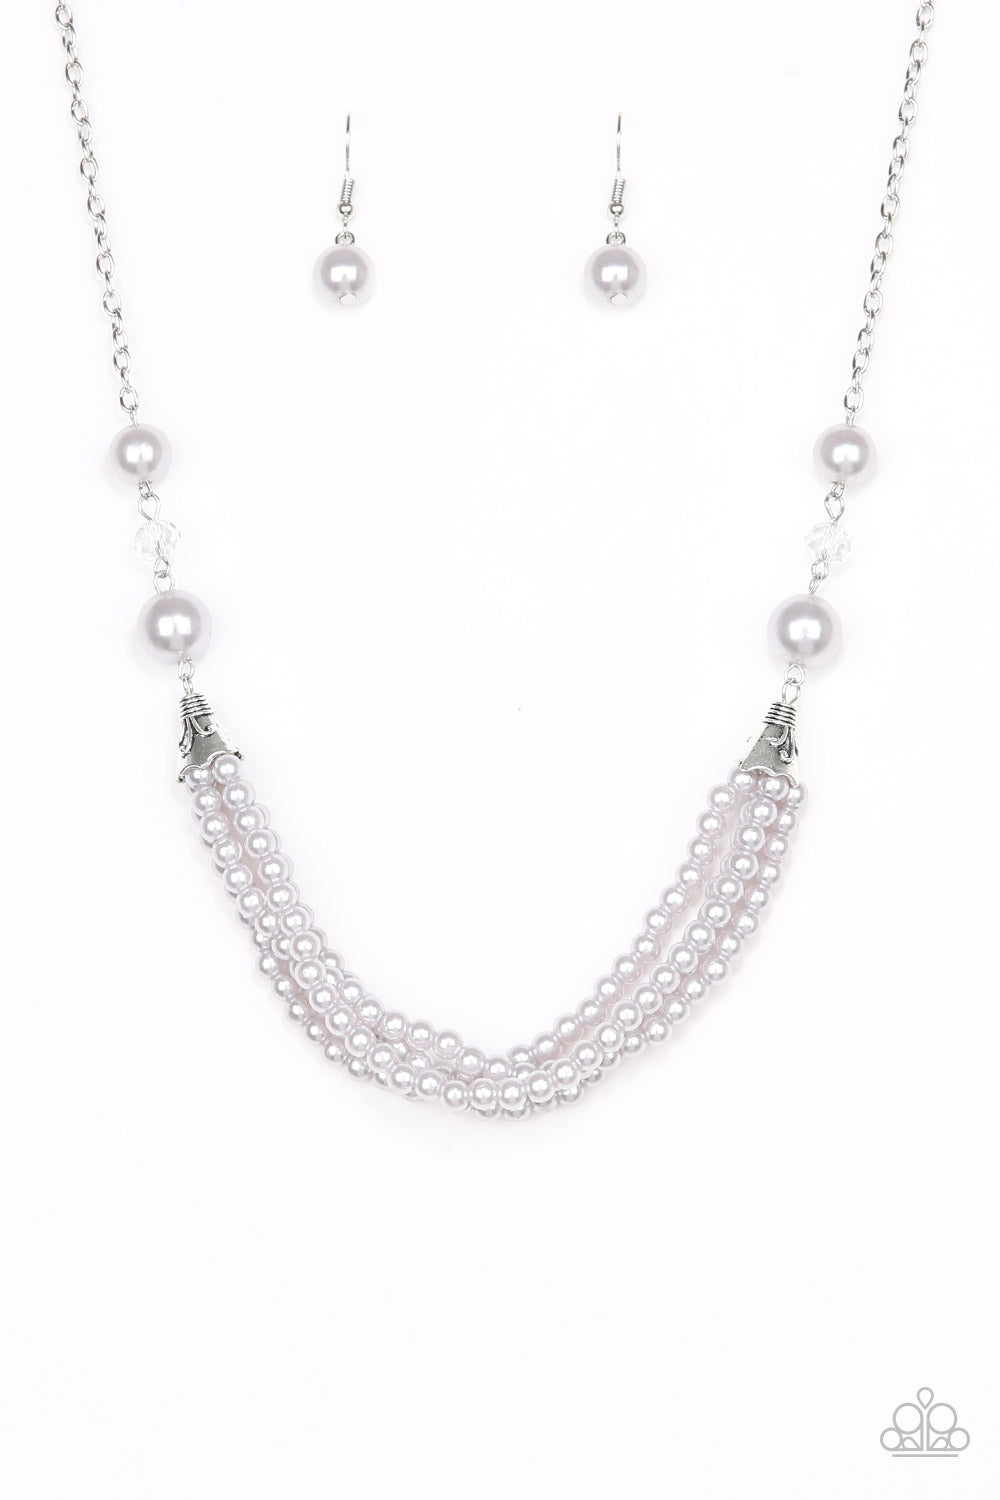 Oversized silver pearls and crystal-like beads give way to layers of beaded pearl strands